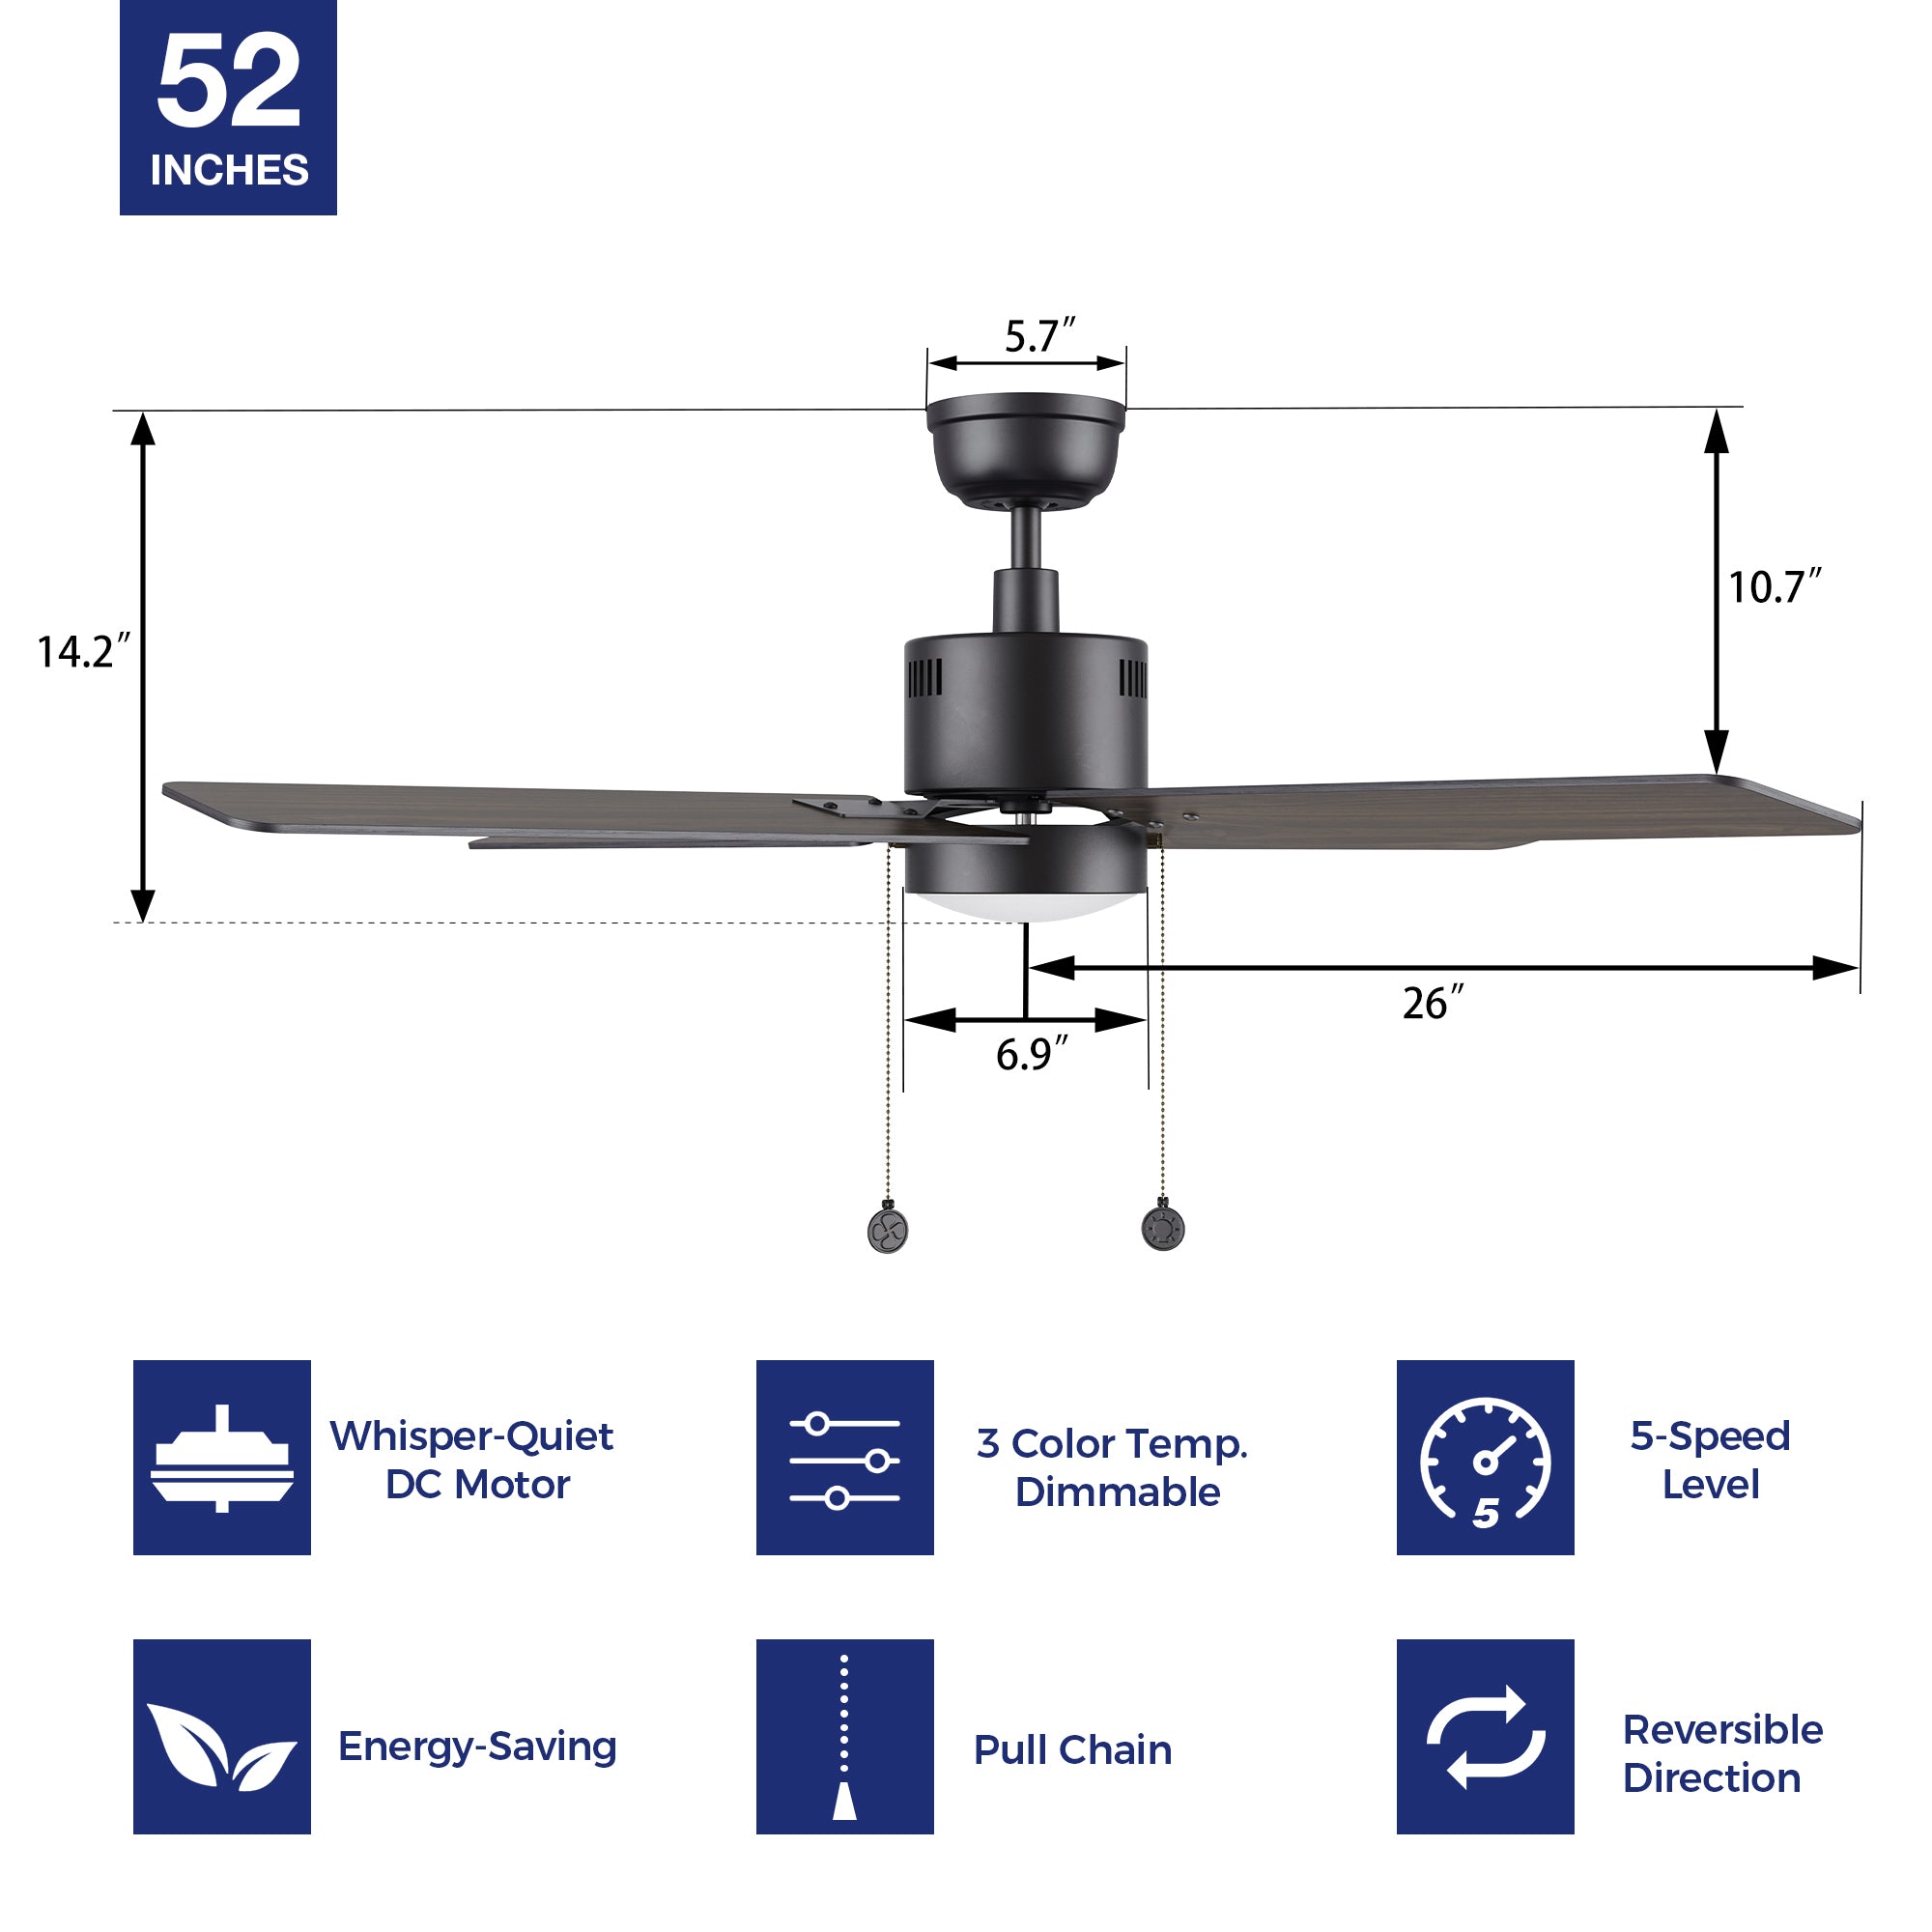 Dimensions and key features of the Rowan 52-inch modern ceiling fan, showcasing size and functional details including pull chain, easy installation, 5-speed DC motor, whisper motor, durable LED light kit, dimmable LED light kit, energy efficient, indoor use, summer mode, winter mode, and wobble-free design.